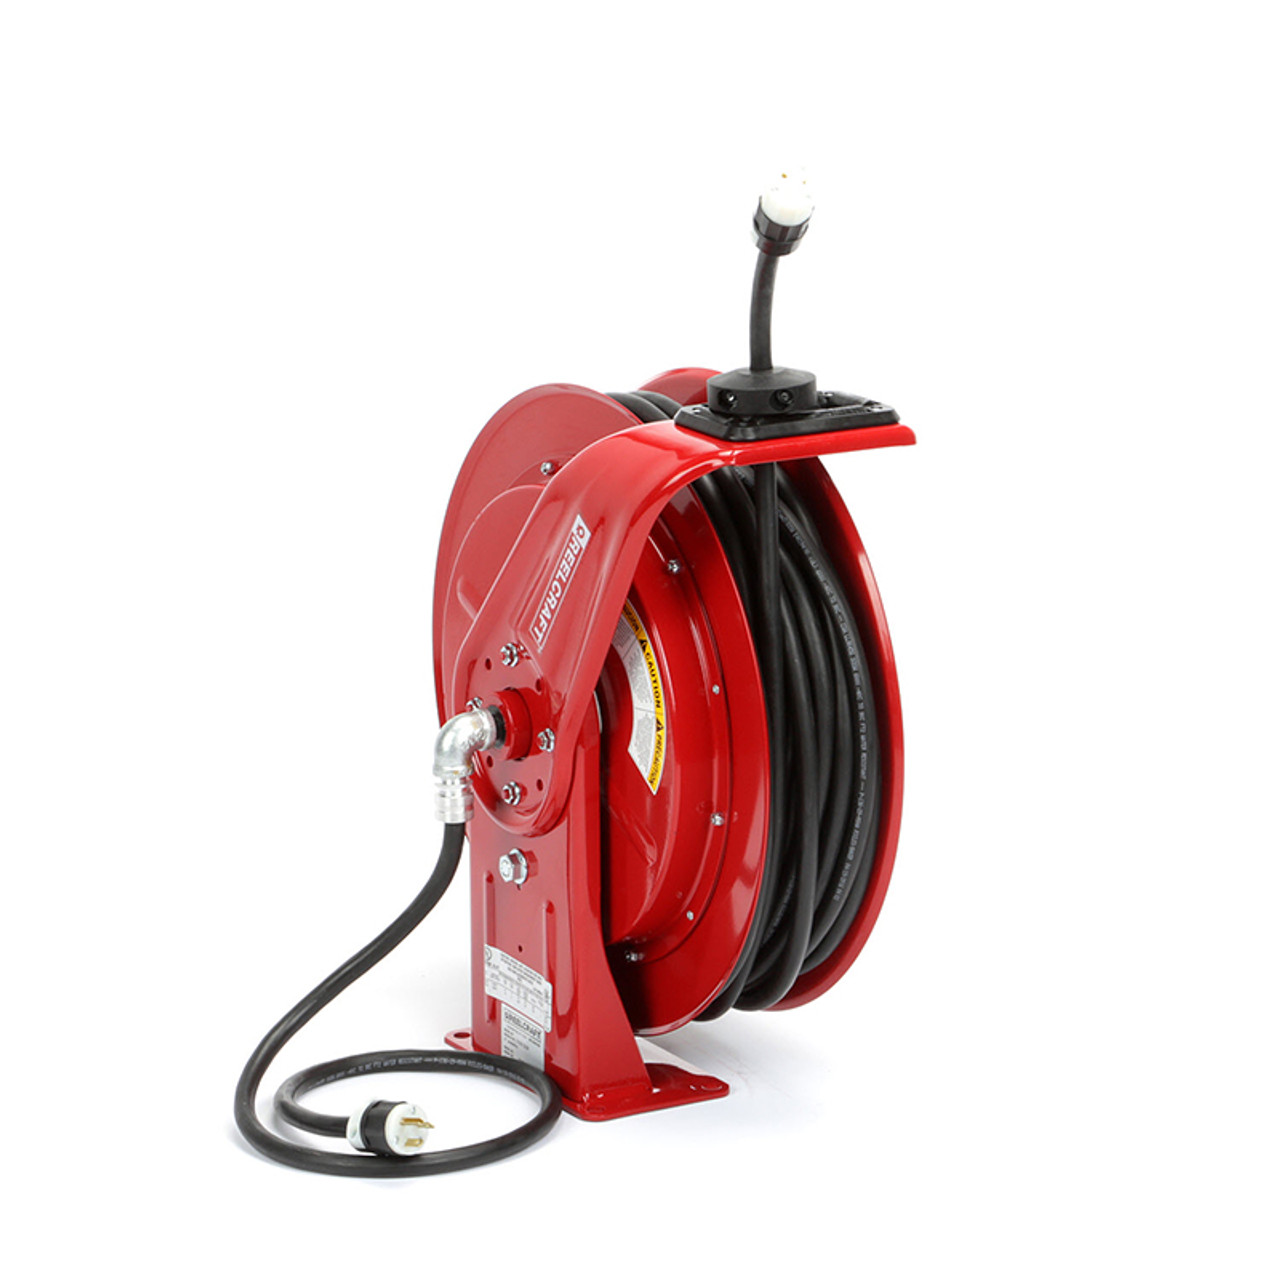 ReelCraft Hose Reels - Cable & Cord Reels